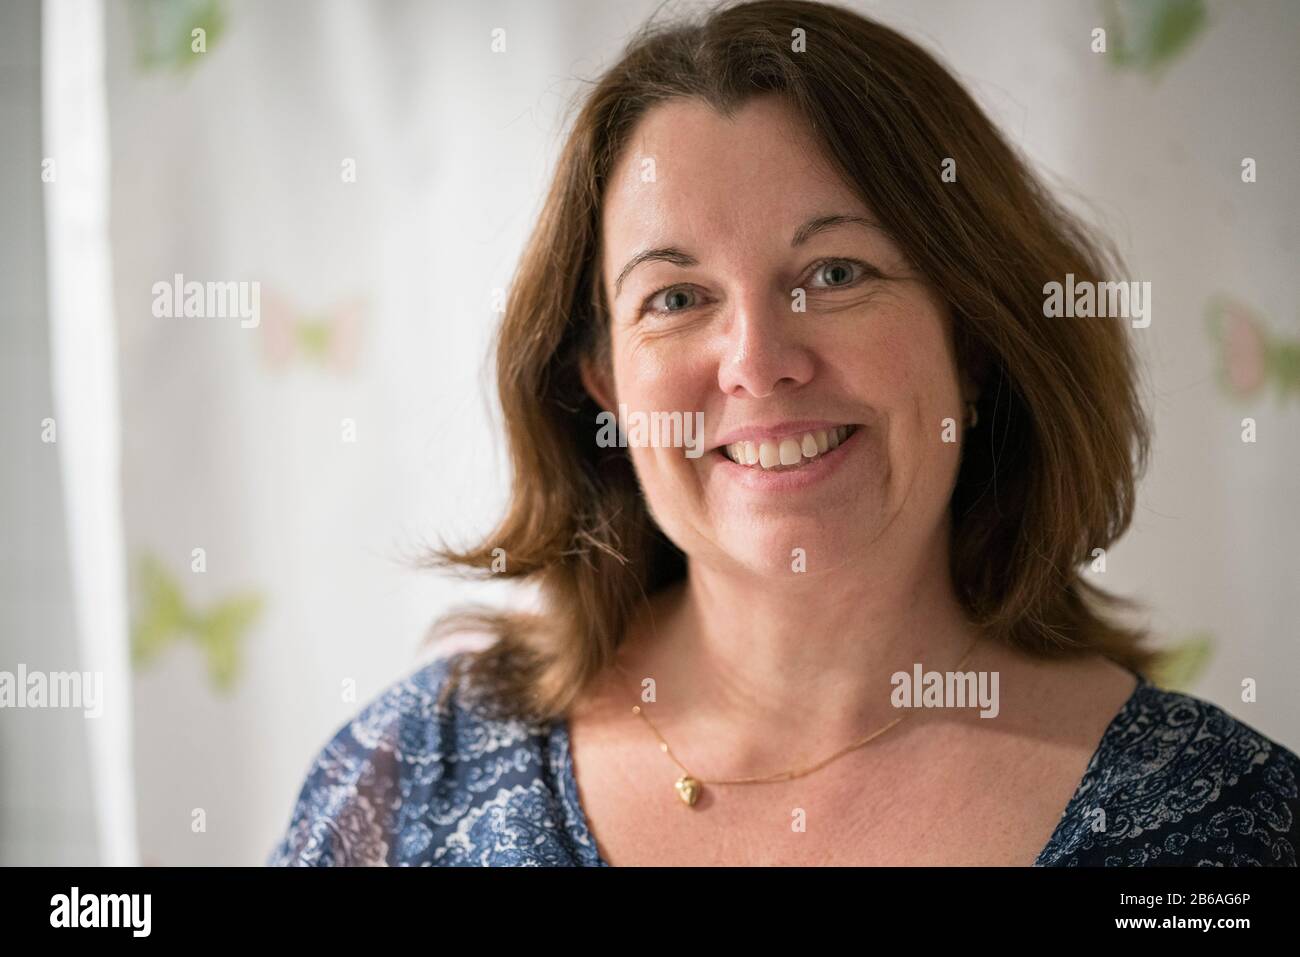 Close up portrait of a smiling 50 year old woman with brown hair. Stock Photo